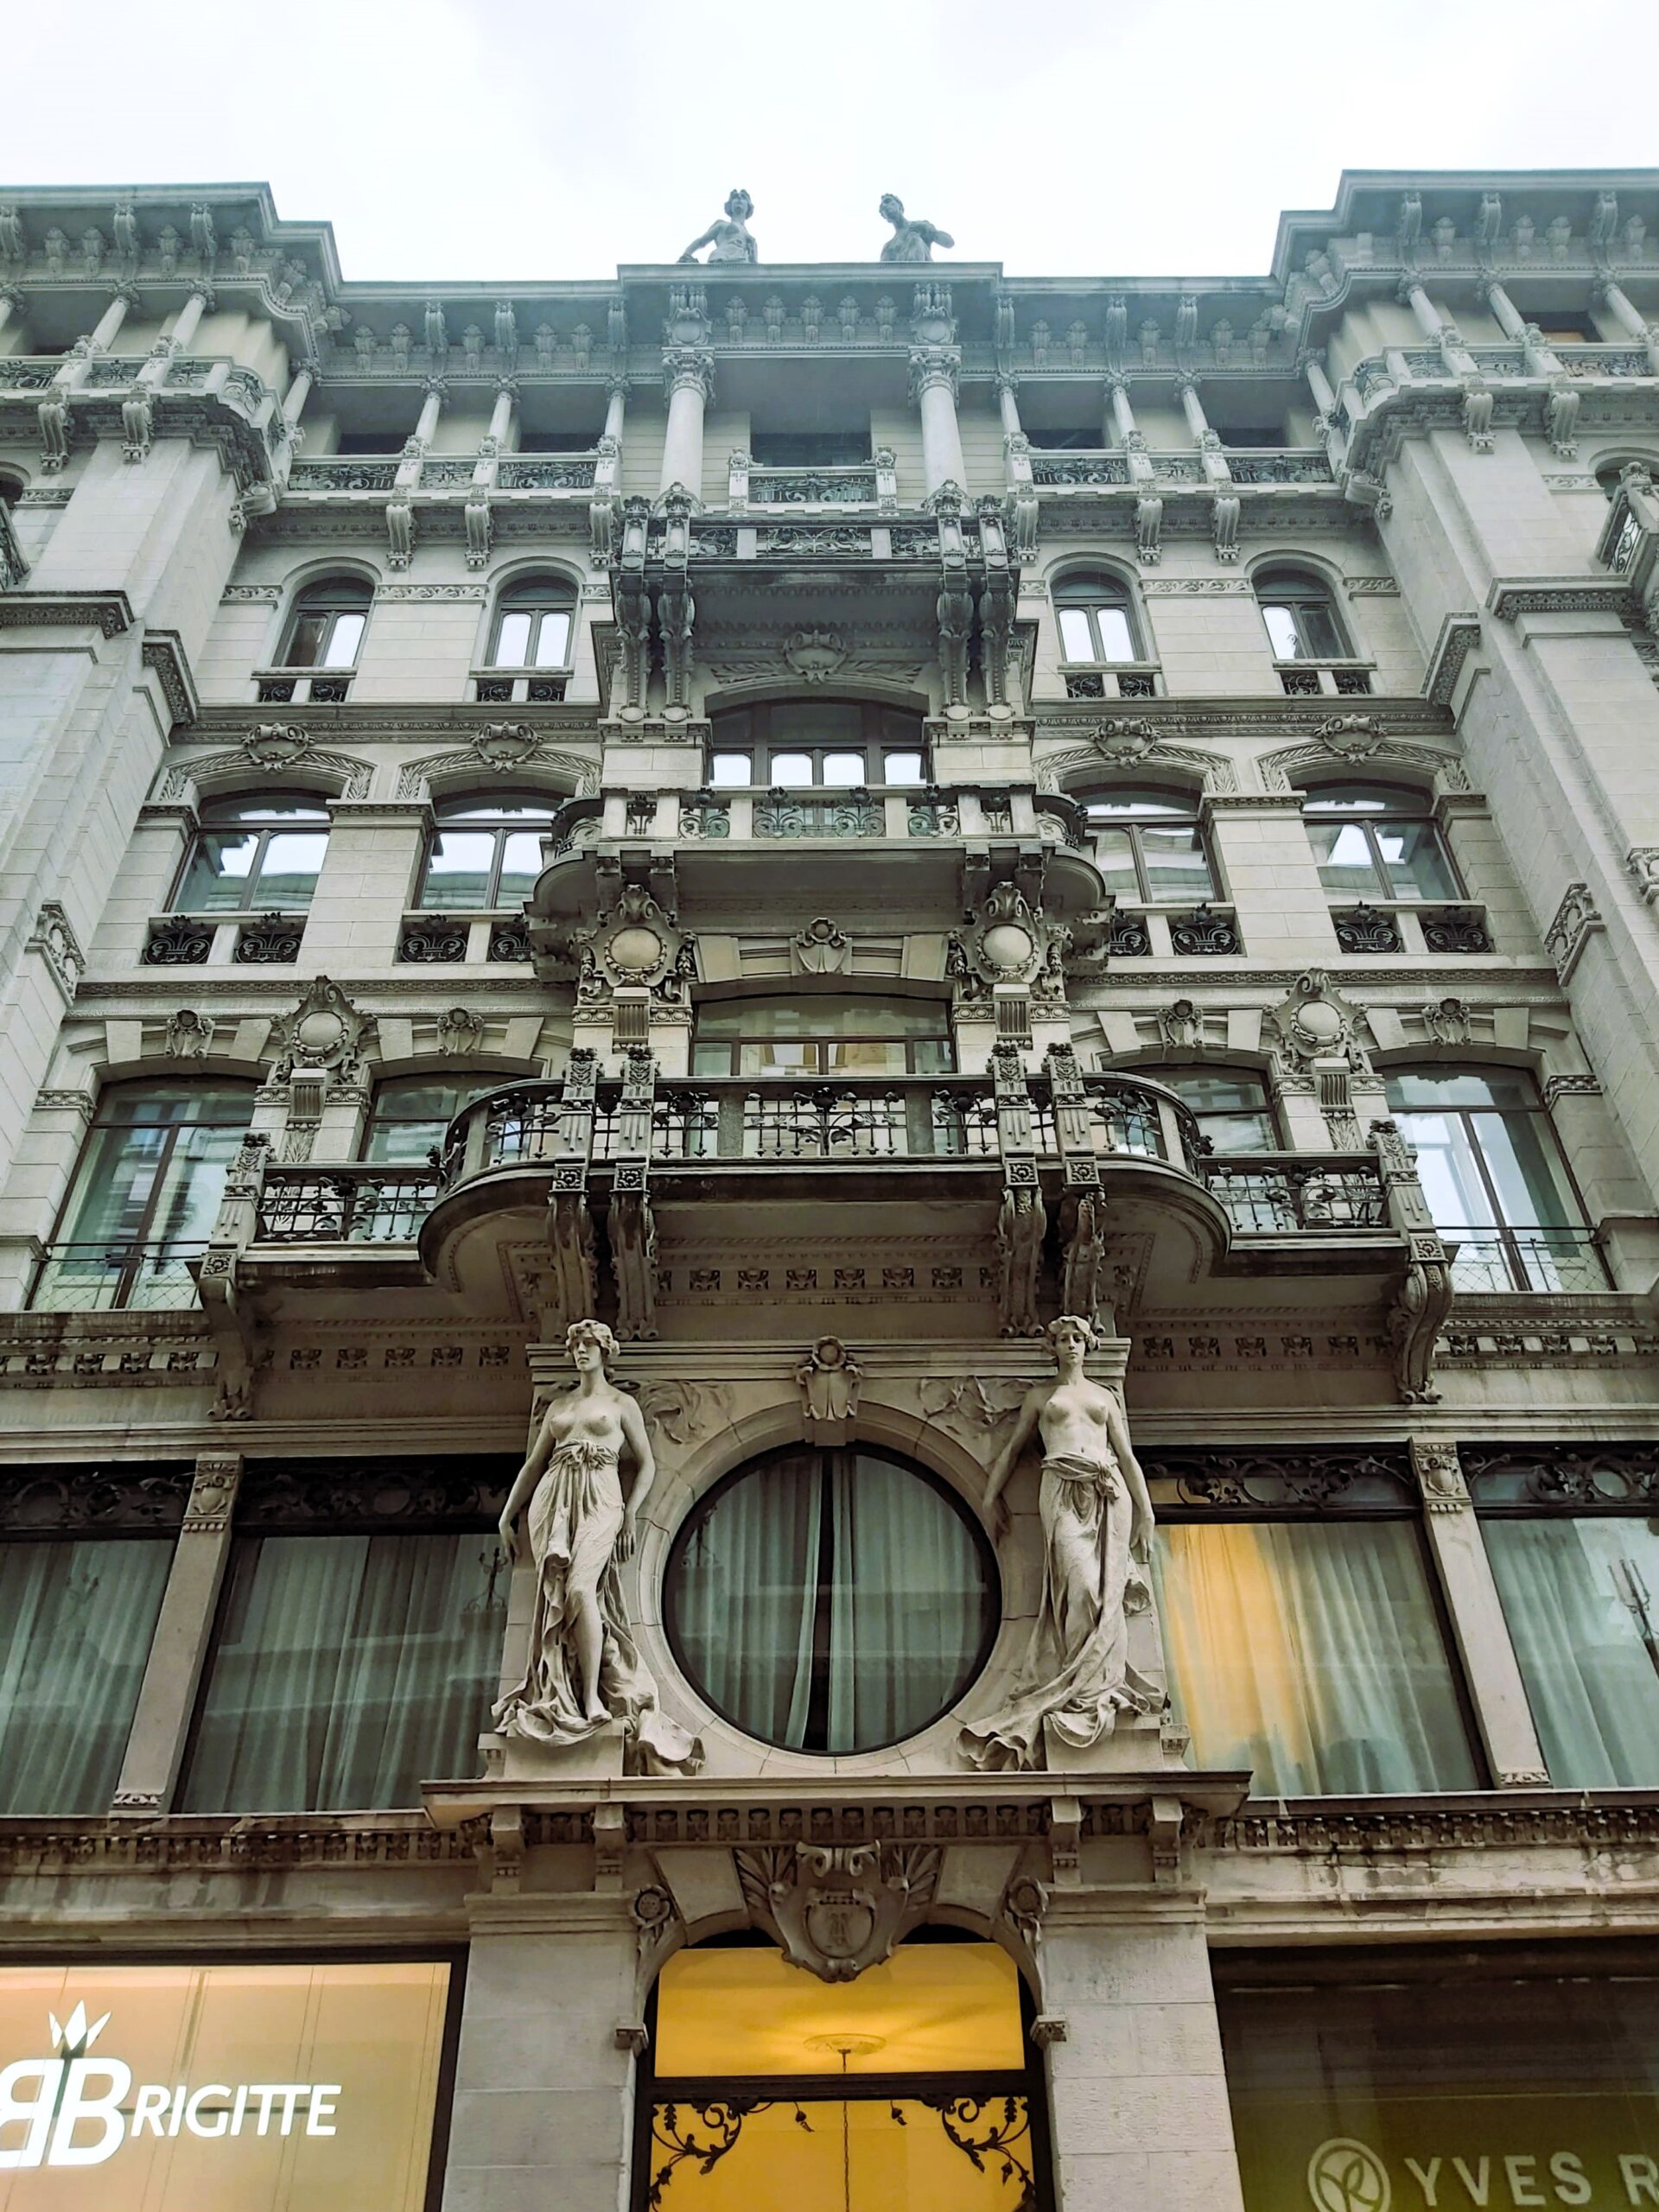 Statuettes on a building above a shop front, Trieste, Italy